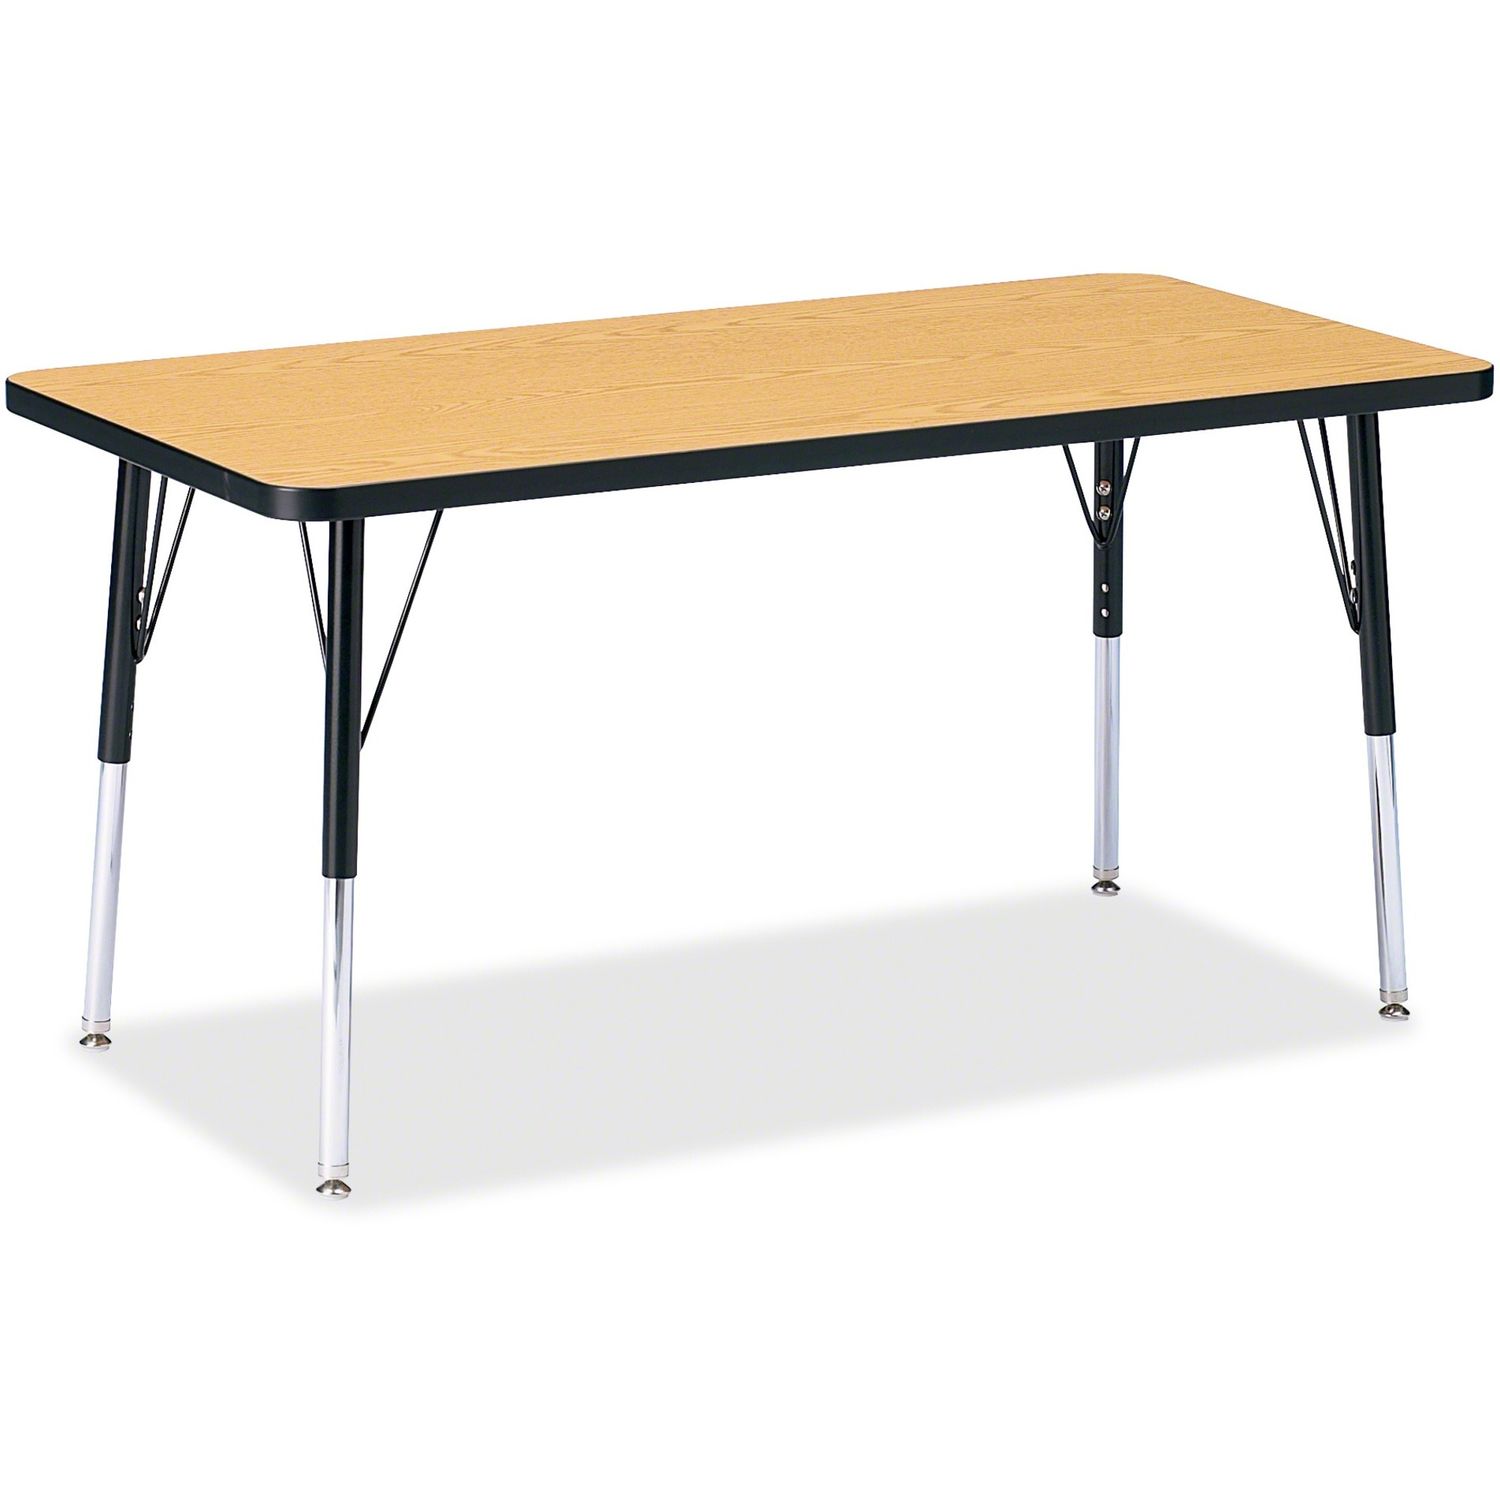 Berries Adult Height Color Top Rectangle Table Black Oak Rectangle, Laminated Top, Four Leg Base, 4 Legs, 48" Table Top Length x 24" Table Top Width x 1.13" Table Top Thickness, 31" Height